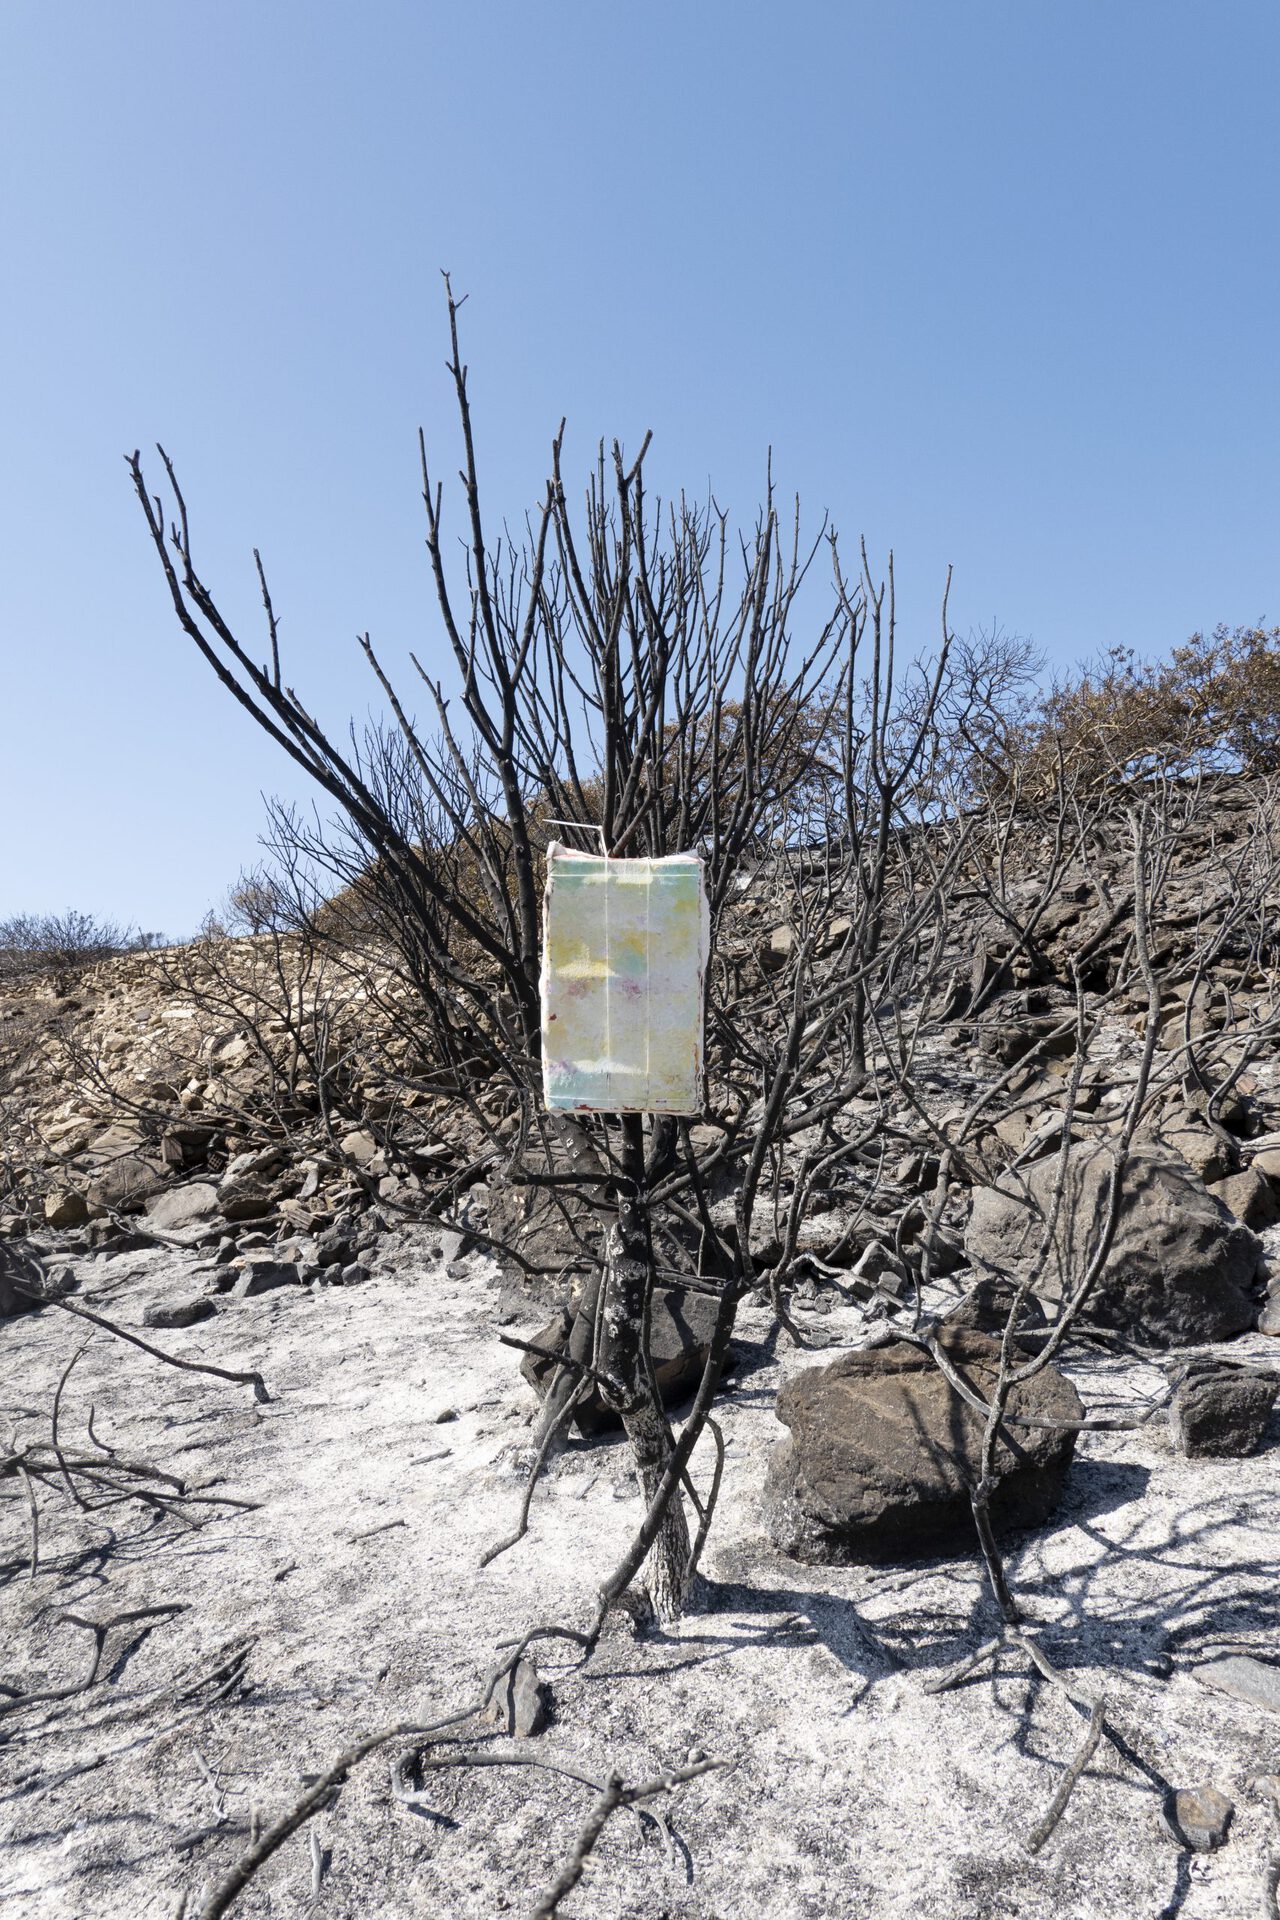 Ishai Shapira Kalter, "Sixth Stop: Naousa", 2021. On a burned tree minutes before Naousa, the artist placed another work cluster. "Naousa", 2021. Oil painting on canvas, glued, stretched, and tied with nylon string to a vegetable / fruit wooden crate, signed with blue pen. 46 x 27 x 9.5 cm